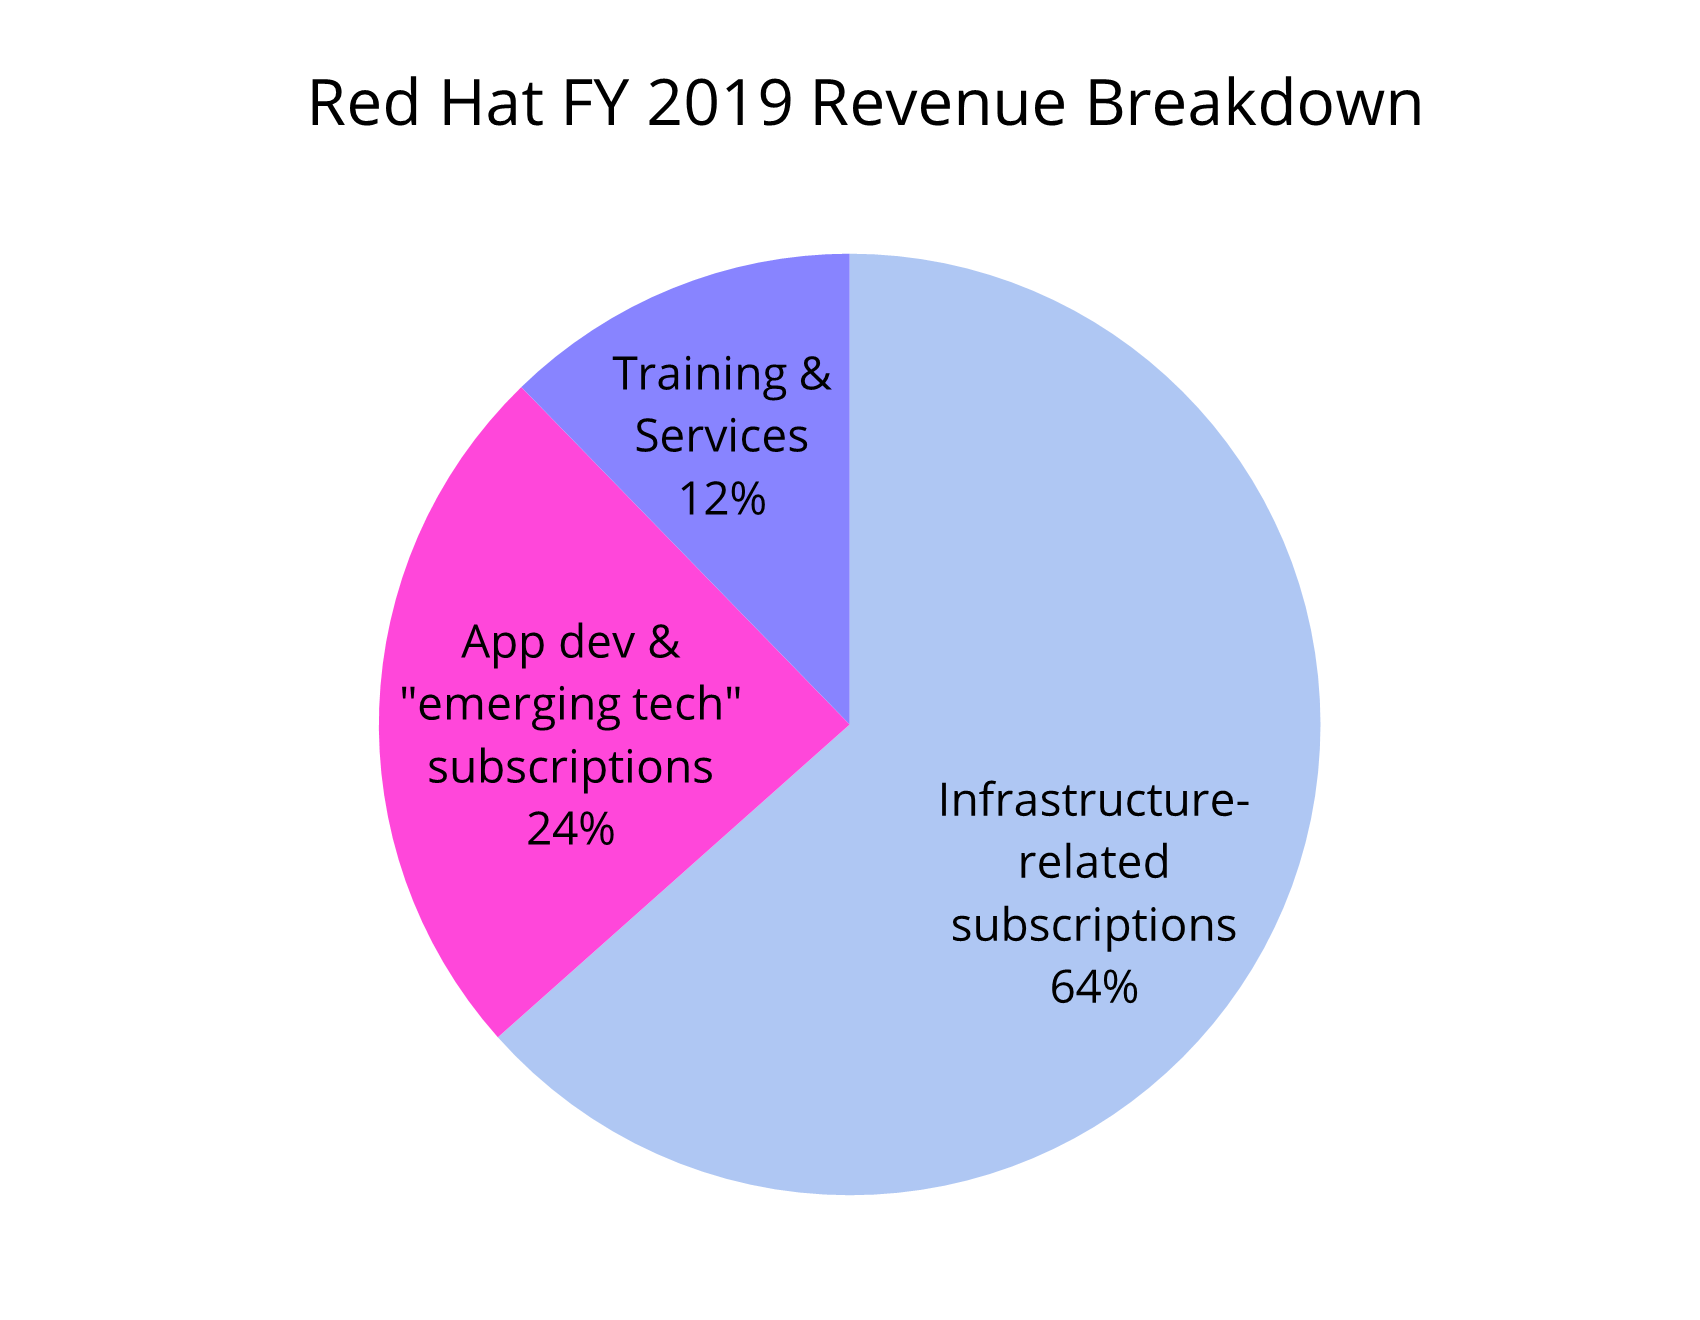 A pie chart showing Red Hat’s Fiscal Year 2019 revenue breakdown. 64% for infrastructure-releated subscriptions, 24% for app development and “emerging technology” subscriptions, and 12% for training and services.